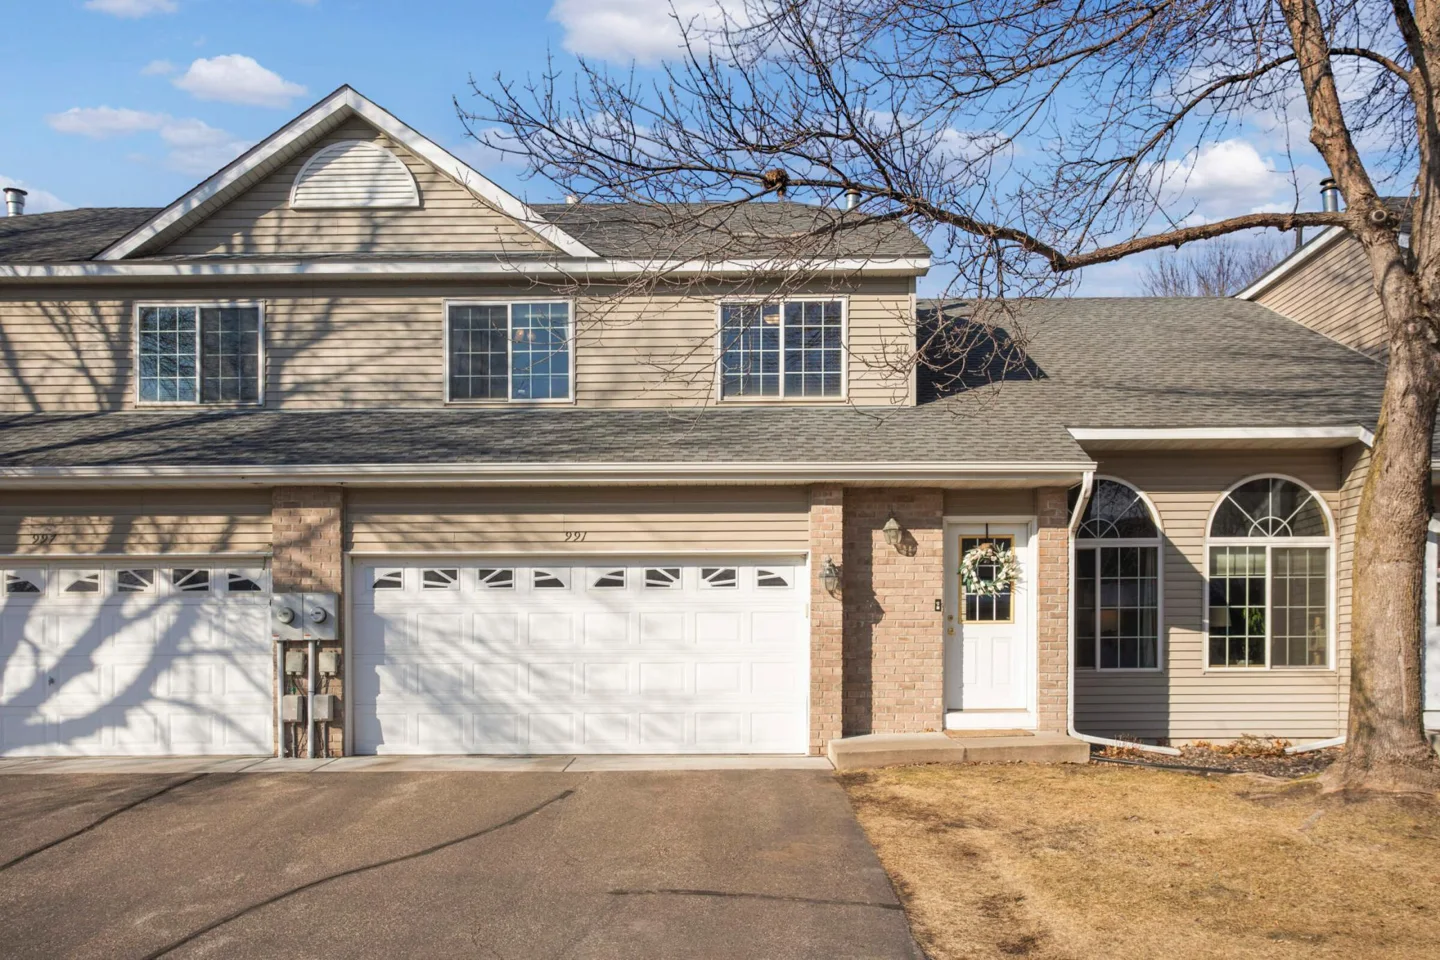 Inviting Coon Rapids Townhome